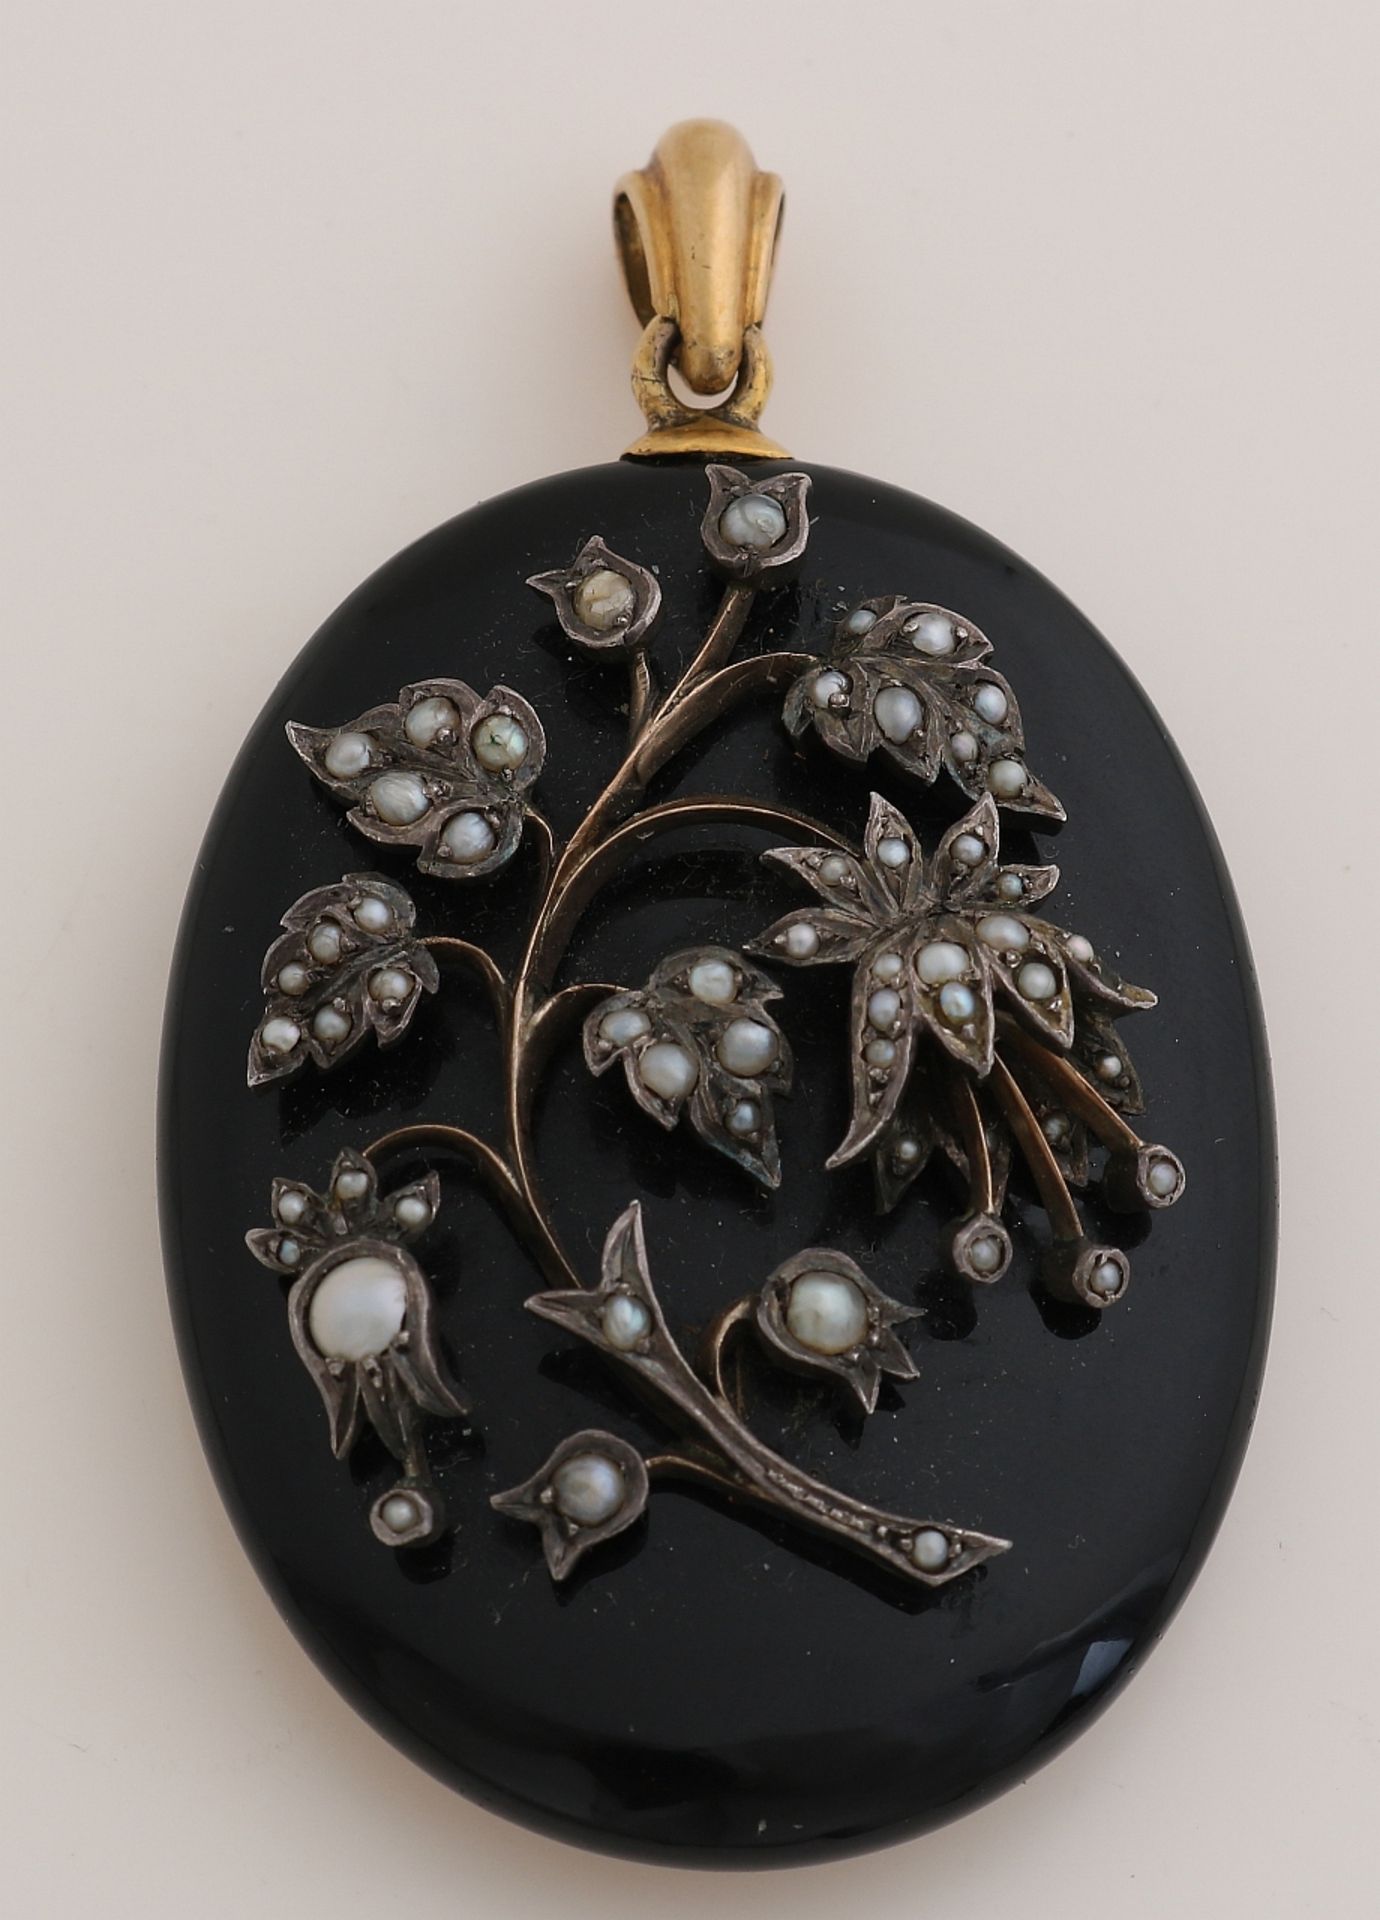 Mourning jewelry, pendant with gold